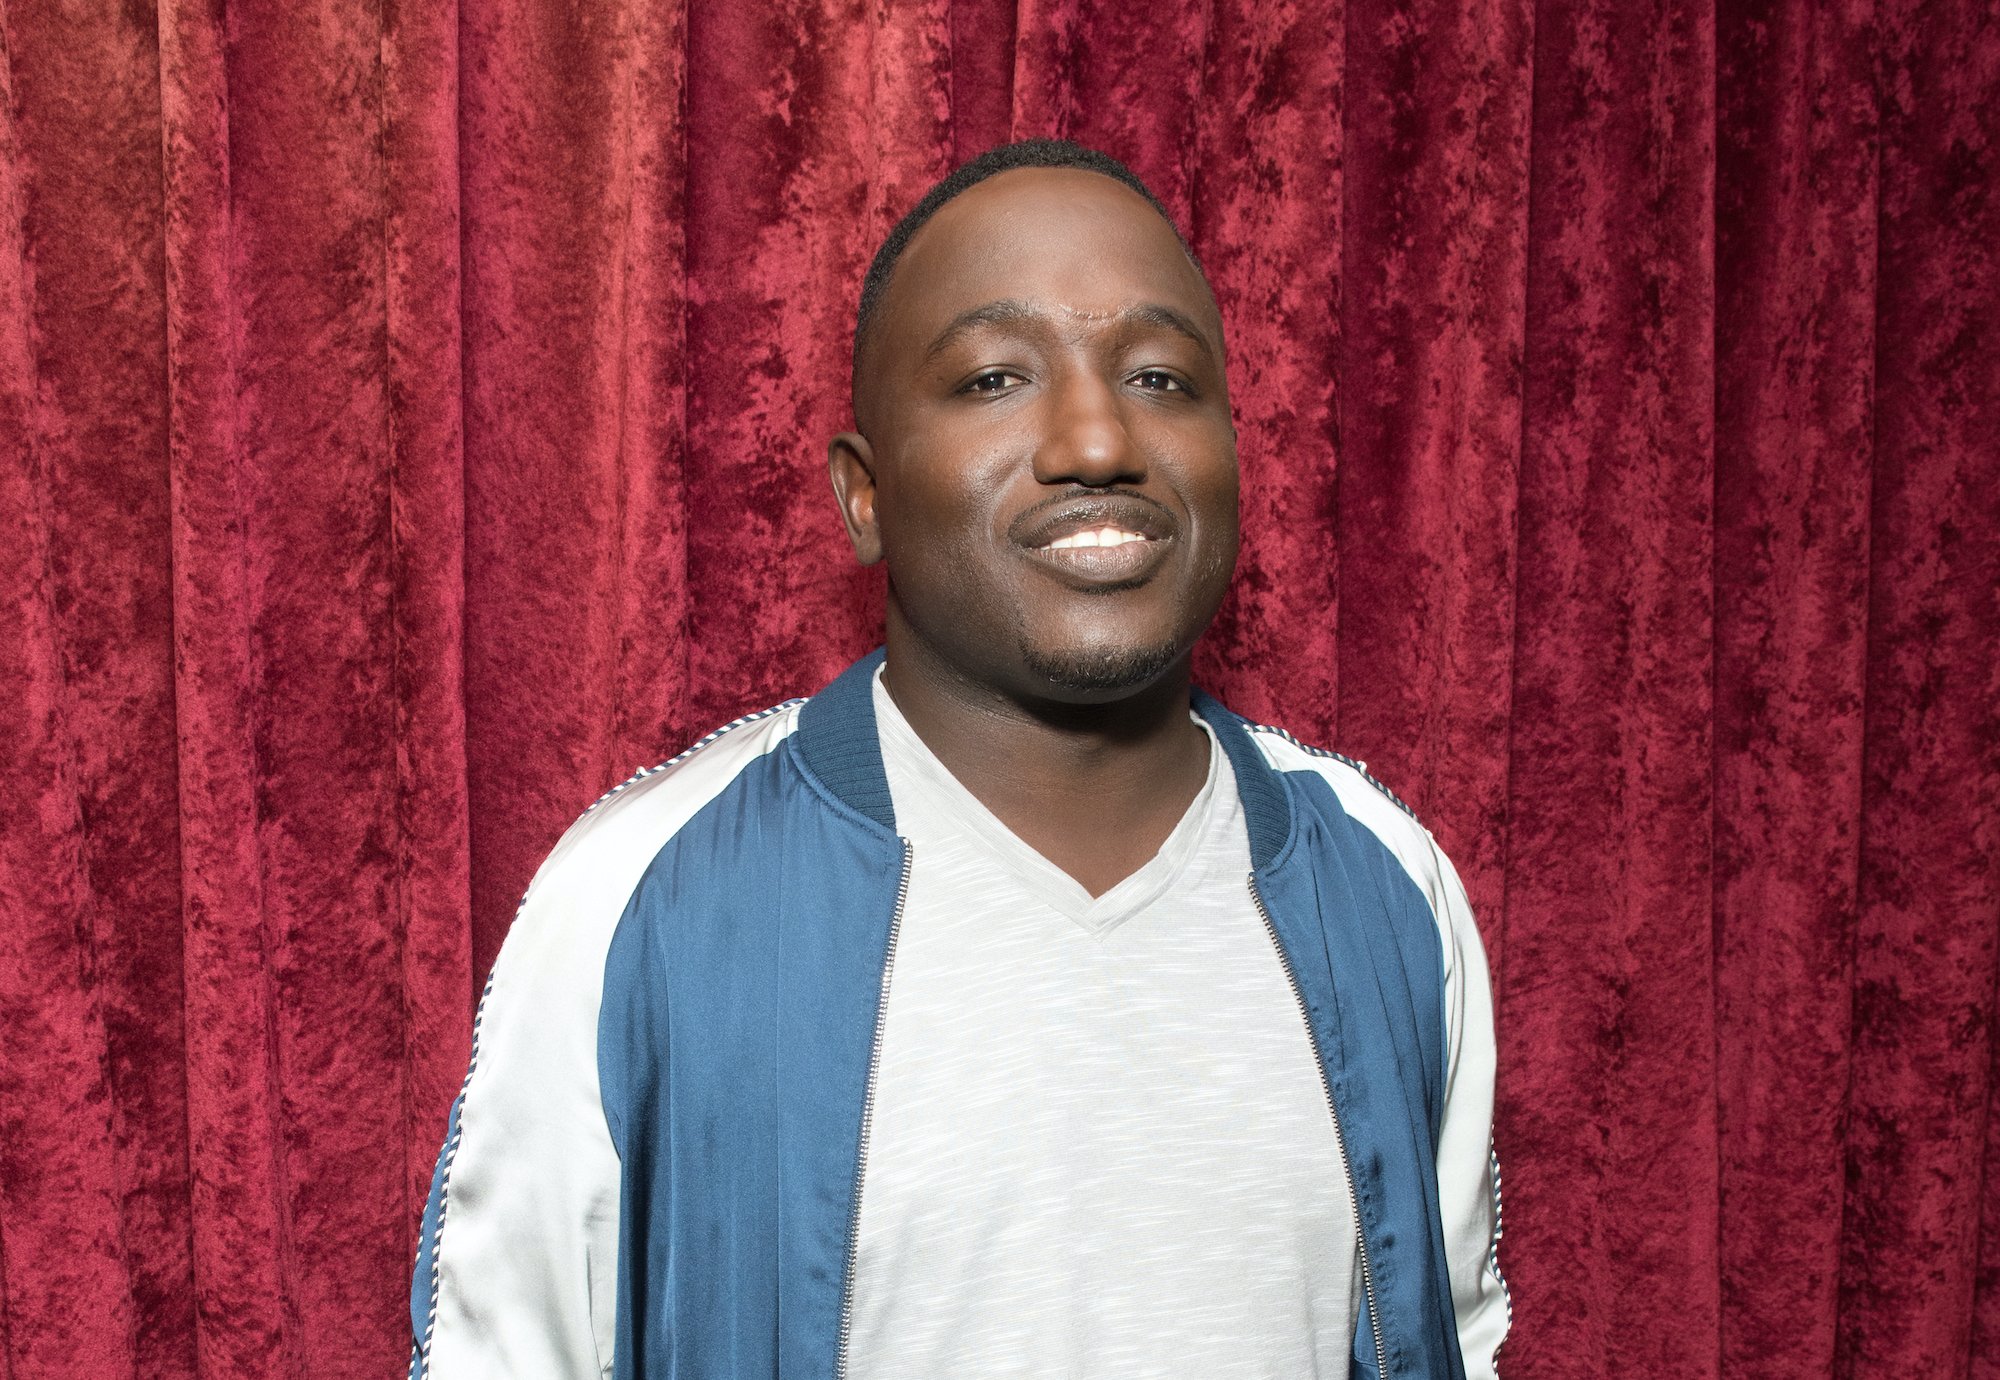 Hannibal Buress smiling in front of a red curtain